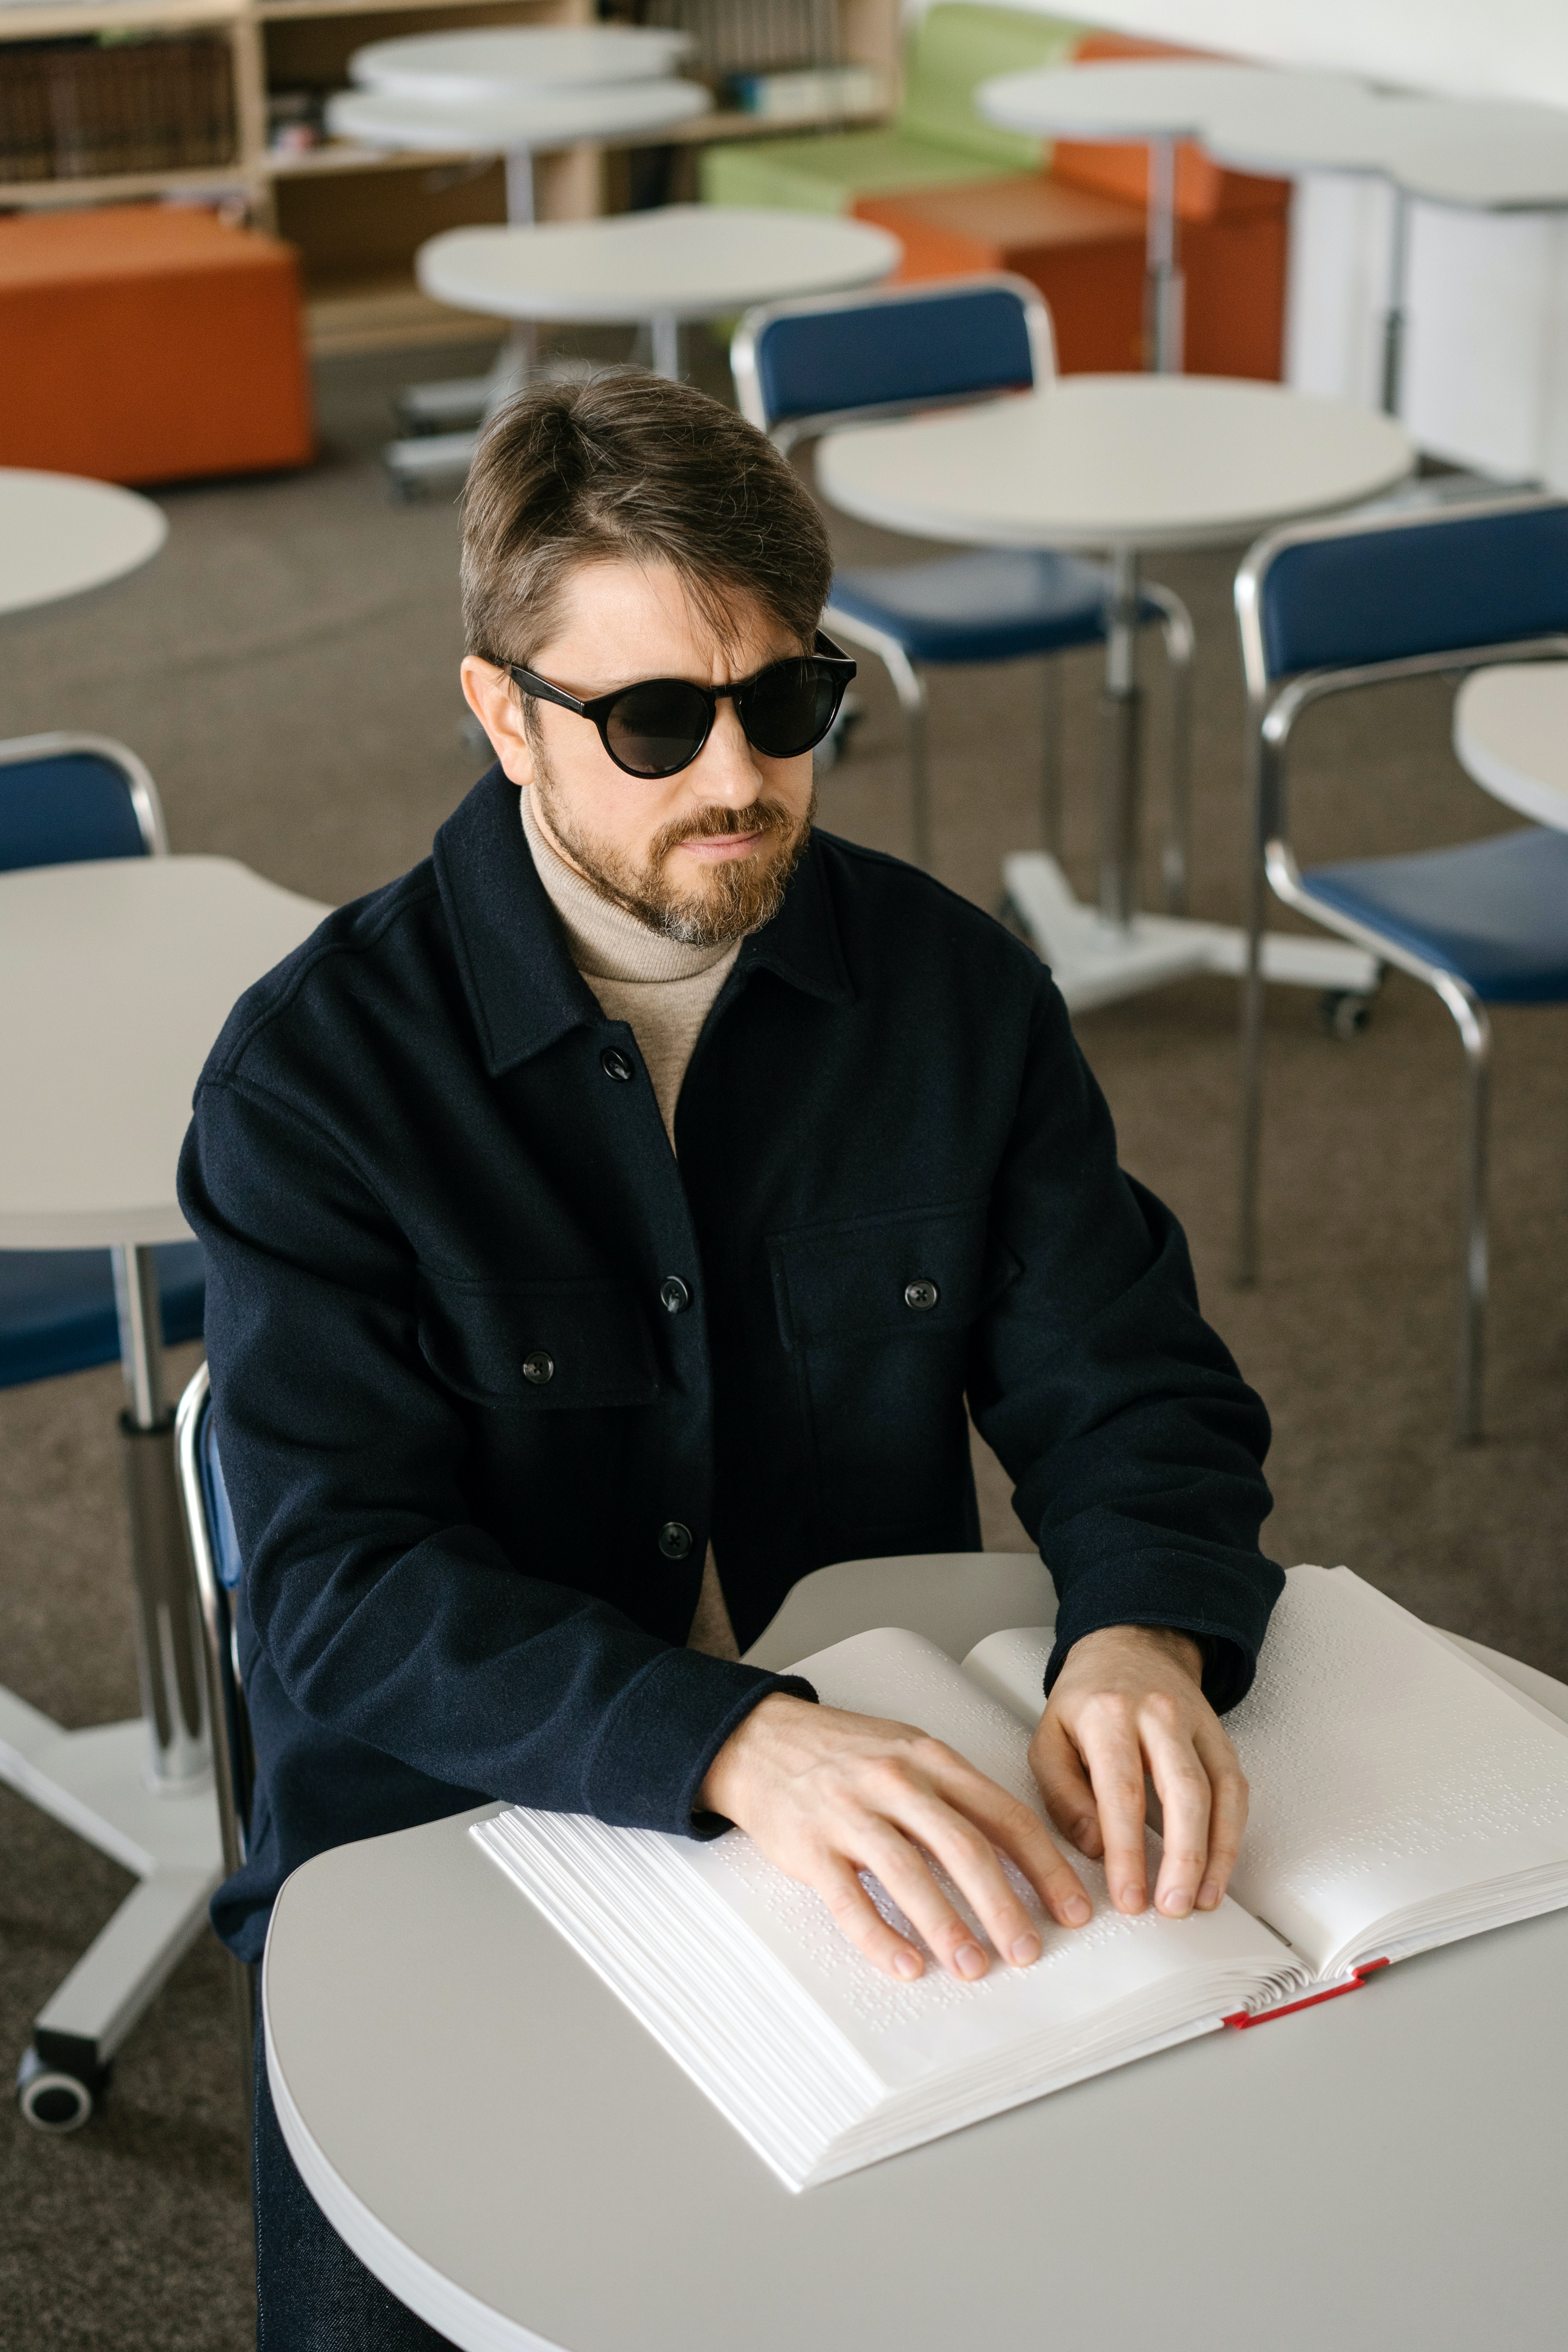 A young man sitting in a classroom reading a braille document.